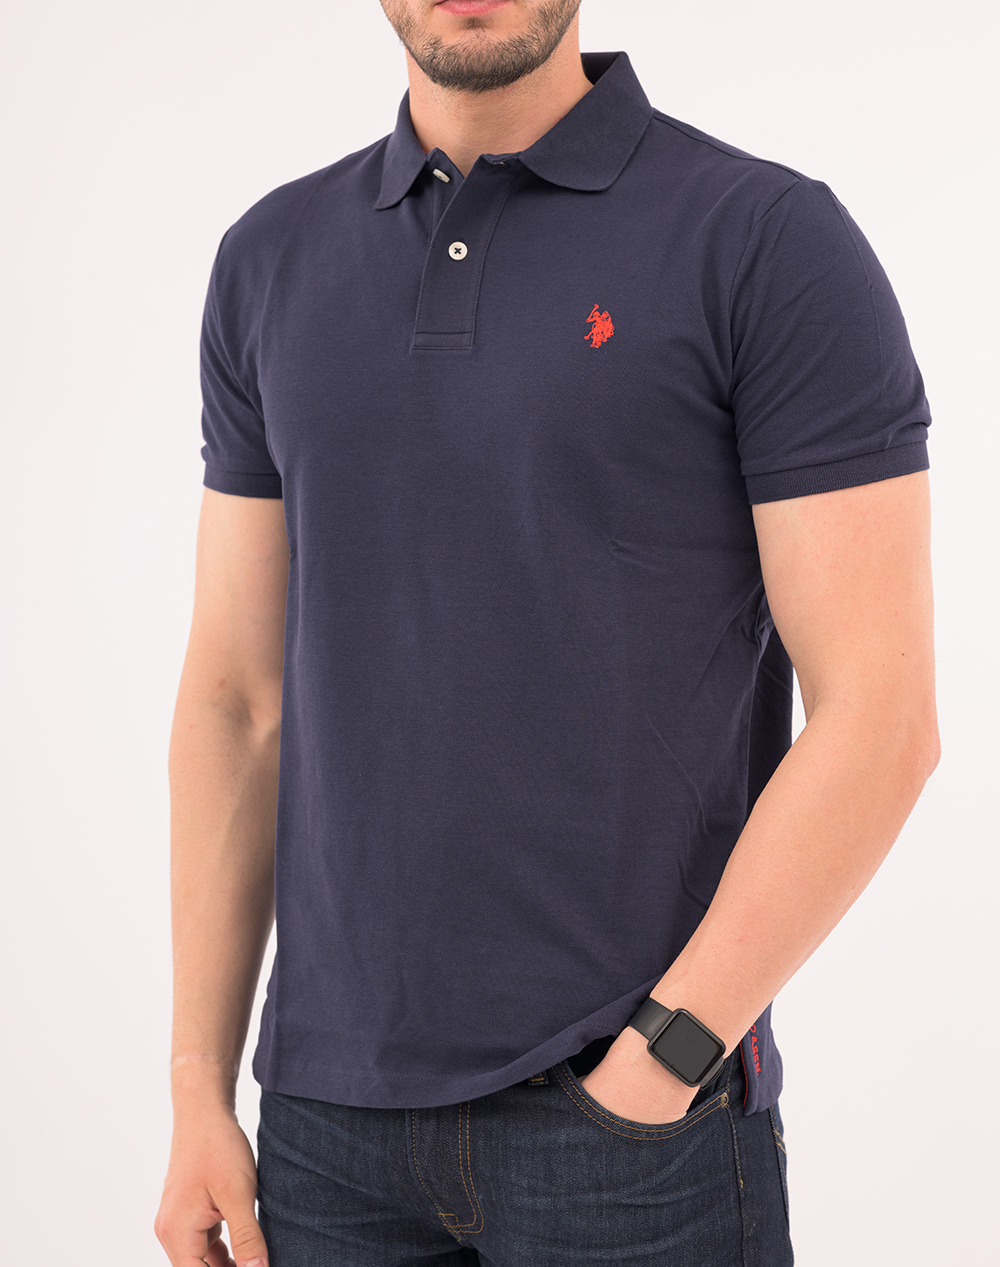 US POLO ASSN KING 41029 EHPD POLO PACK OF 400 ΜΠΛΟΥΖΑ ΑΝΔΡΙΚΟ 6735541029P400-179 DarkBlue 3820A0USP3400003_XR28999